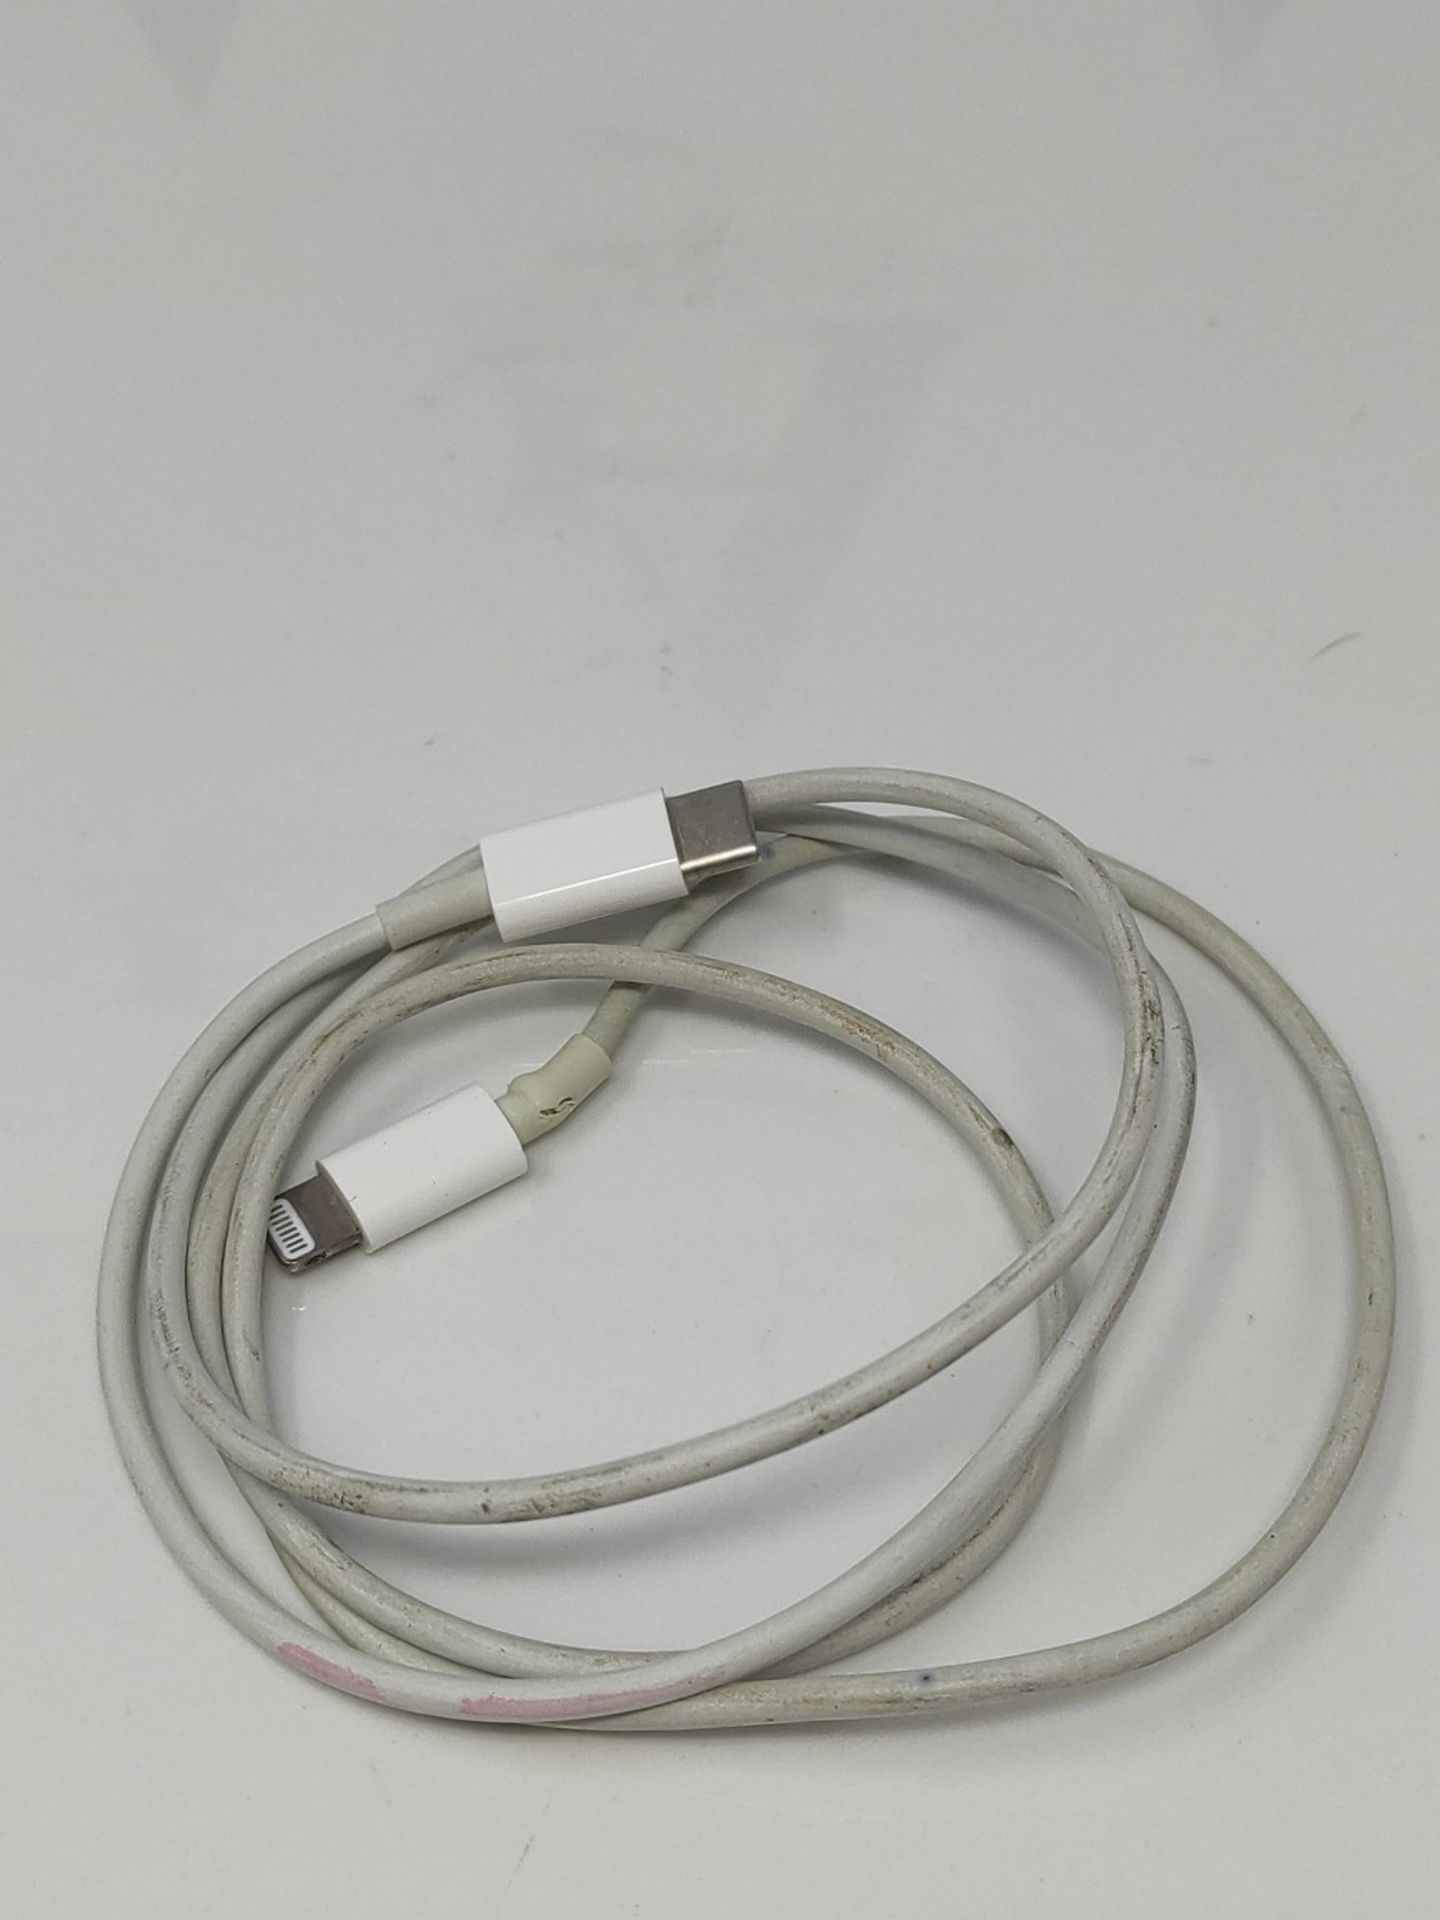 Apple Lightning to USB-C Cable (1m), Tablet - Image 3 of 3